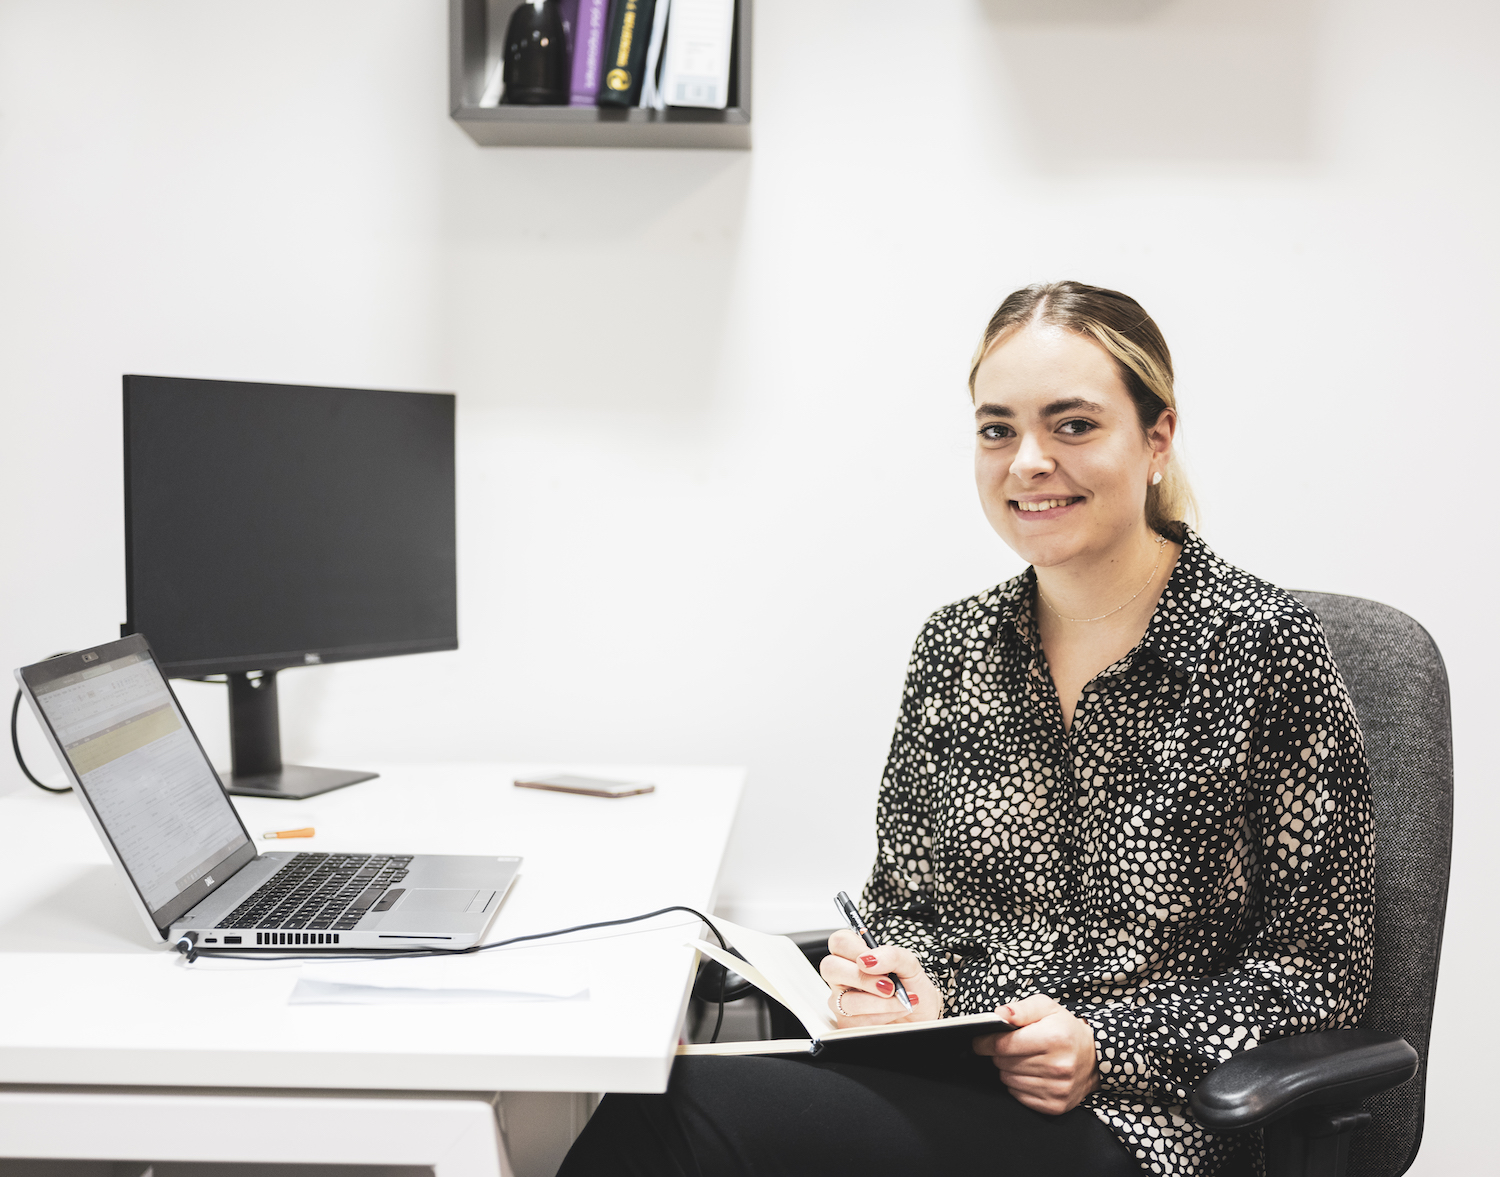 Meet our undergraduate placement student Emma news-image